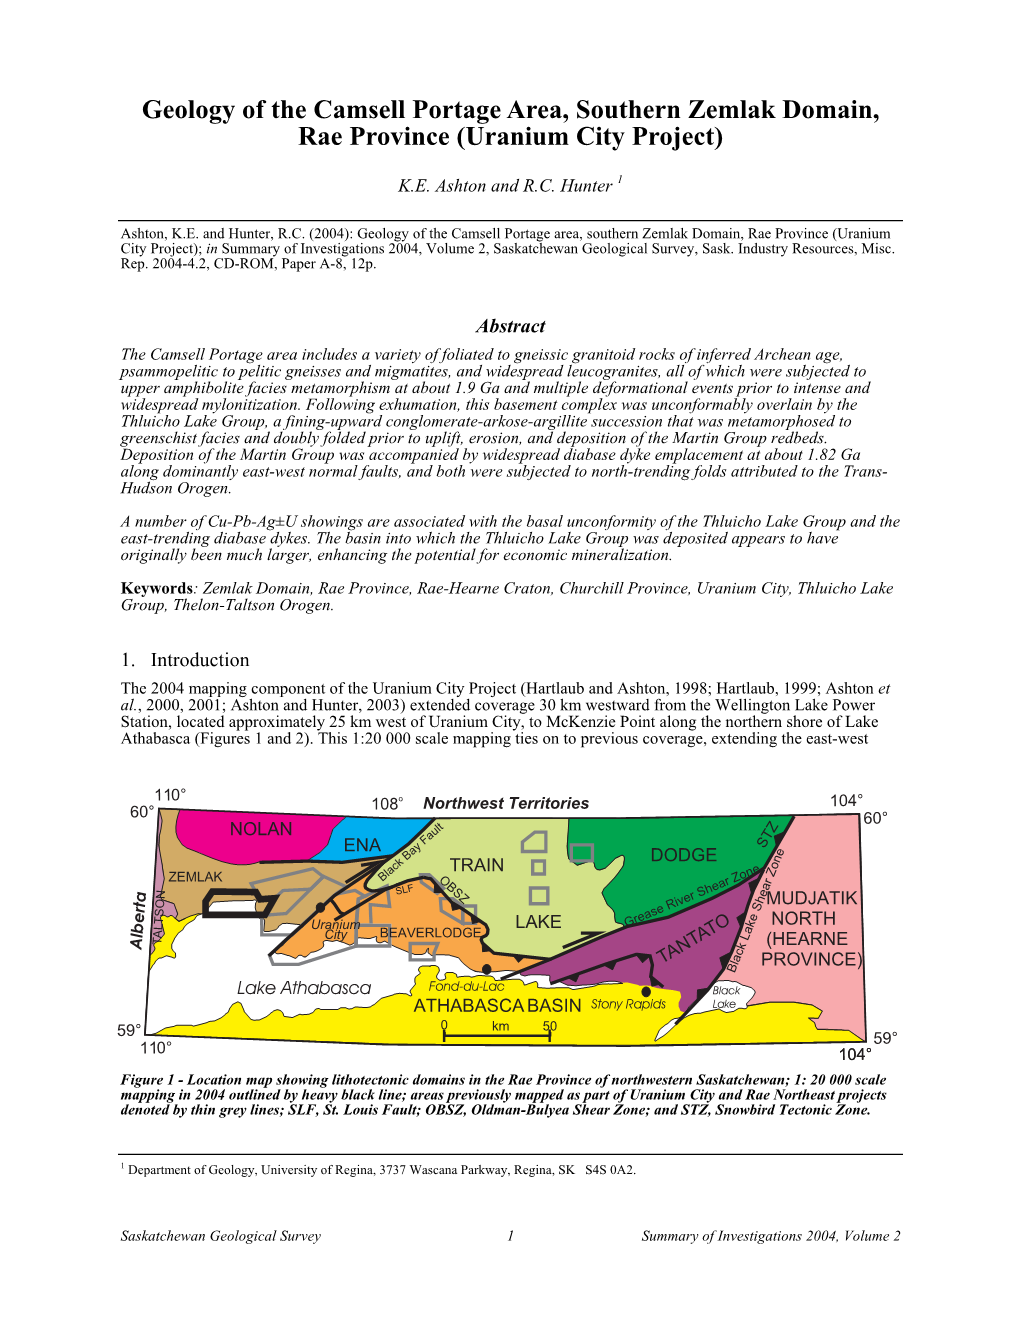 Geology of the Camsell Portage Area, Southern Zemlak Domain, Rae Province (Uranium City Project)